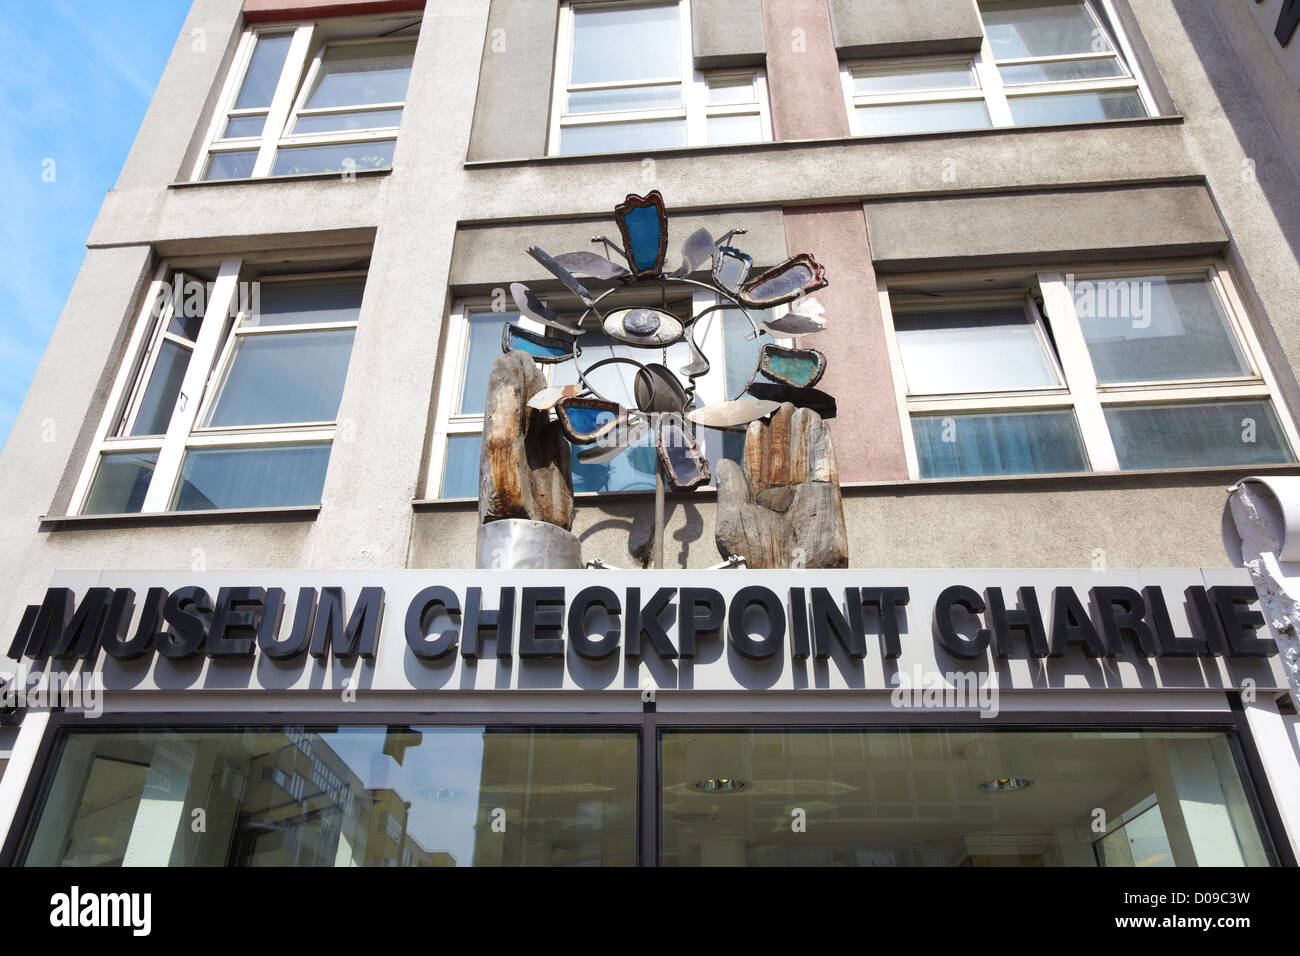 Museum Checkpoint Charlie in Berlin Stockfoto